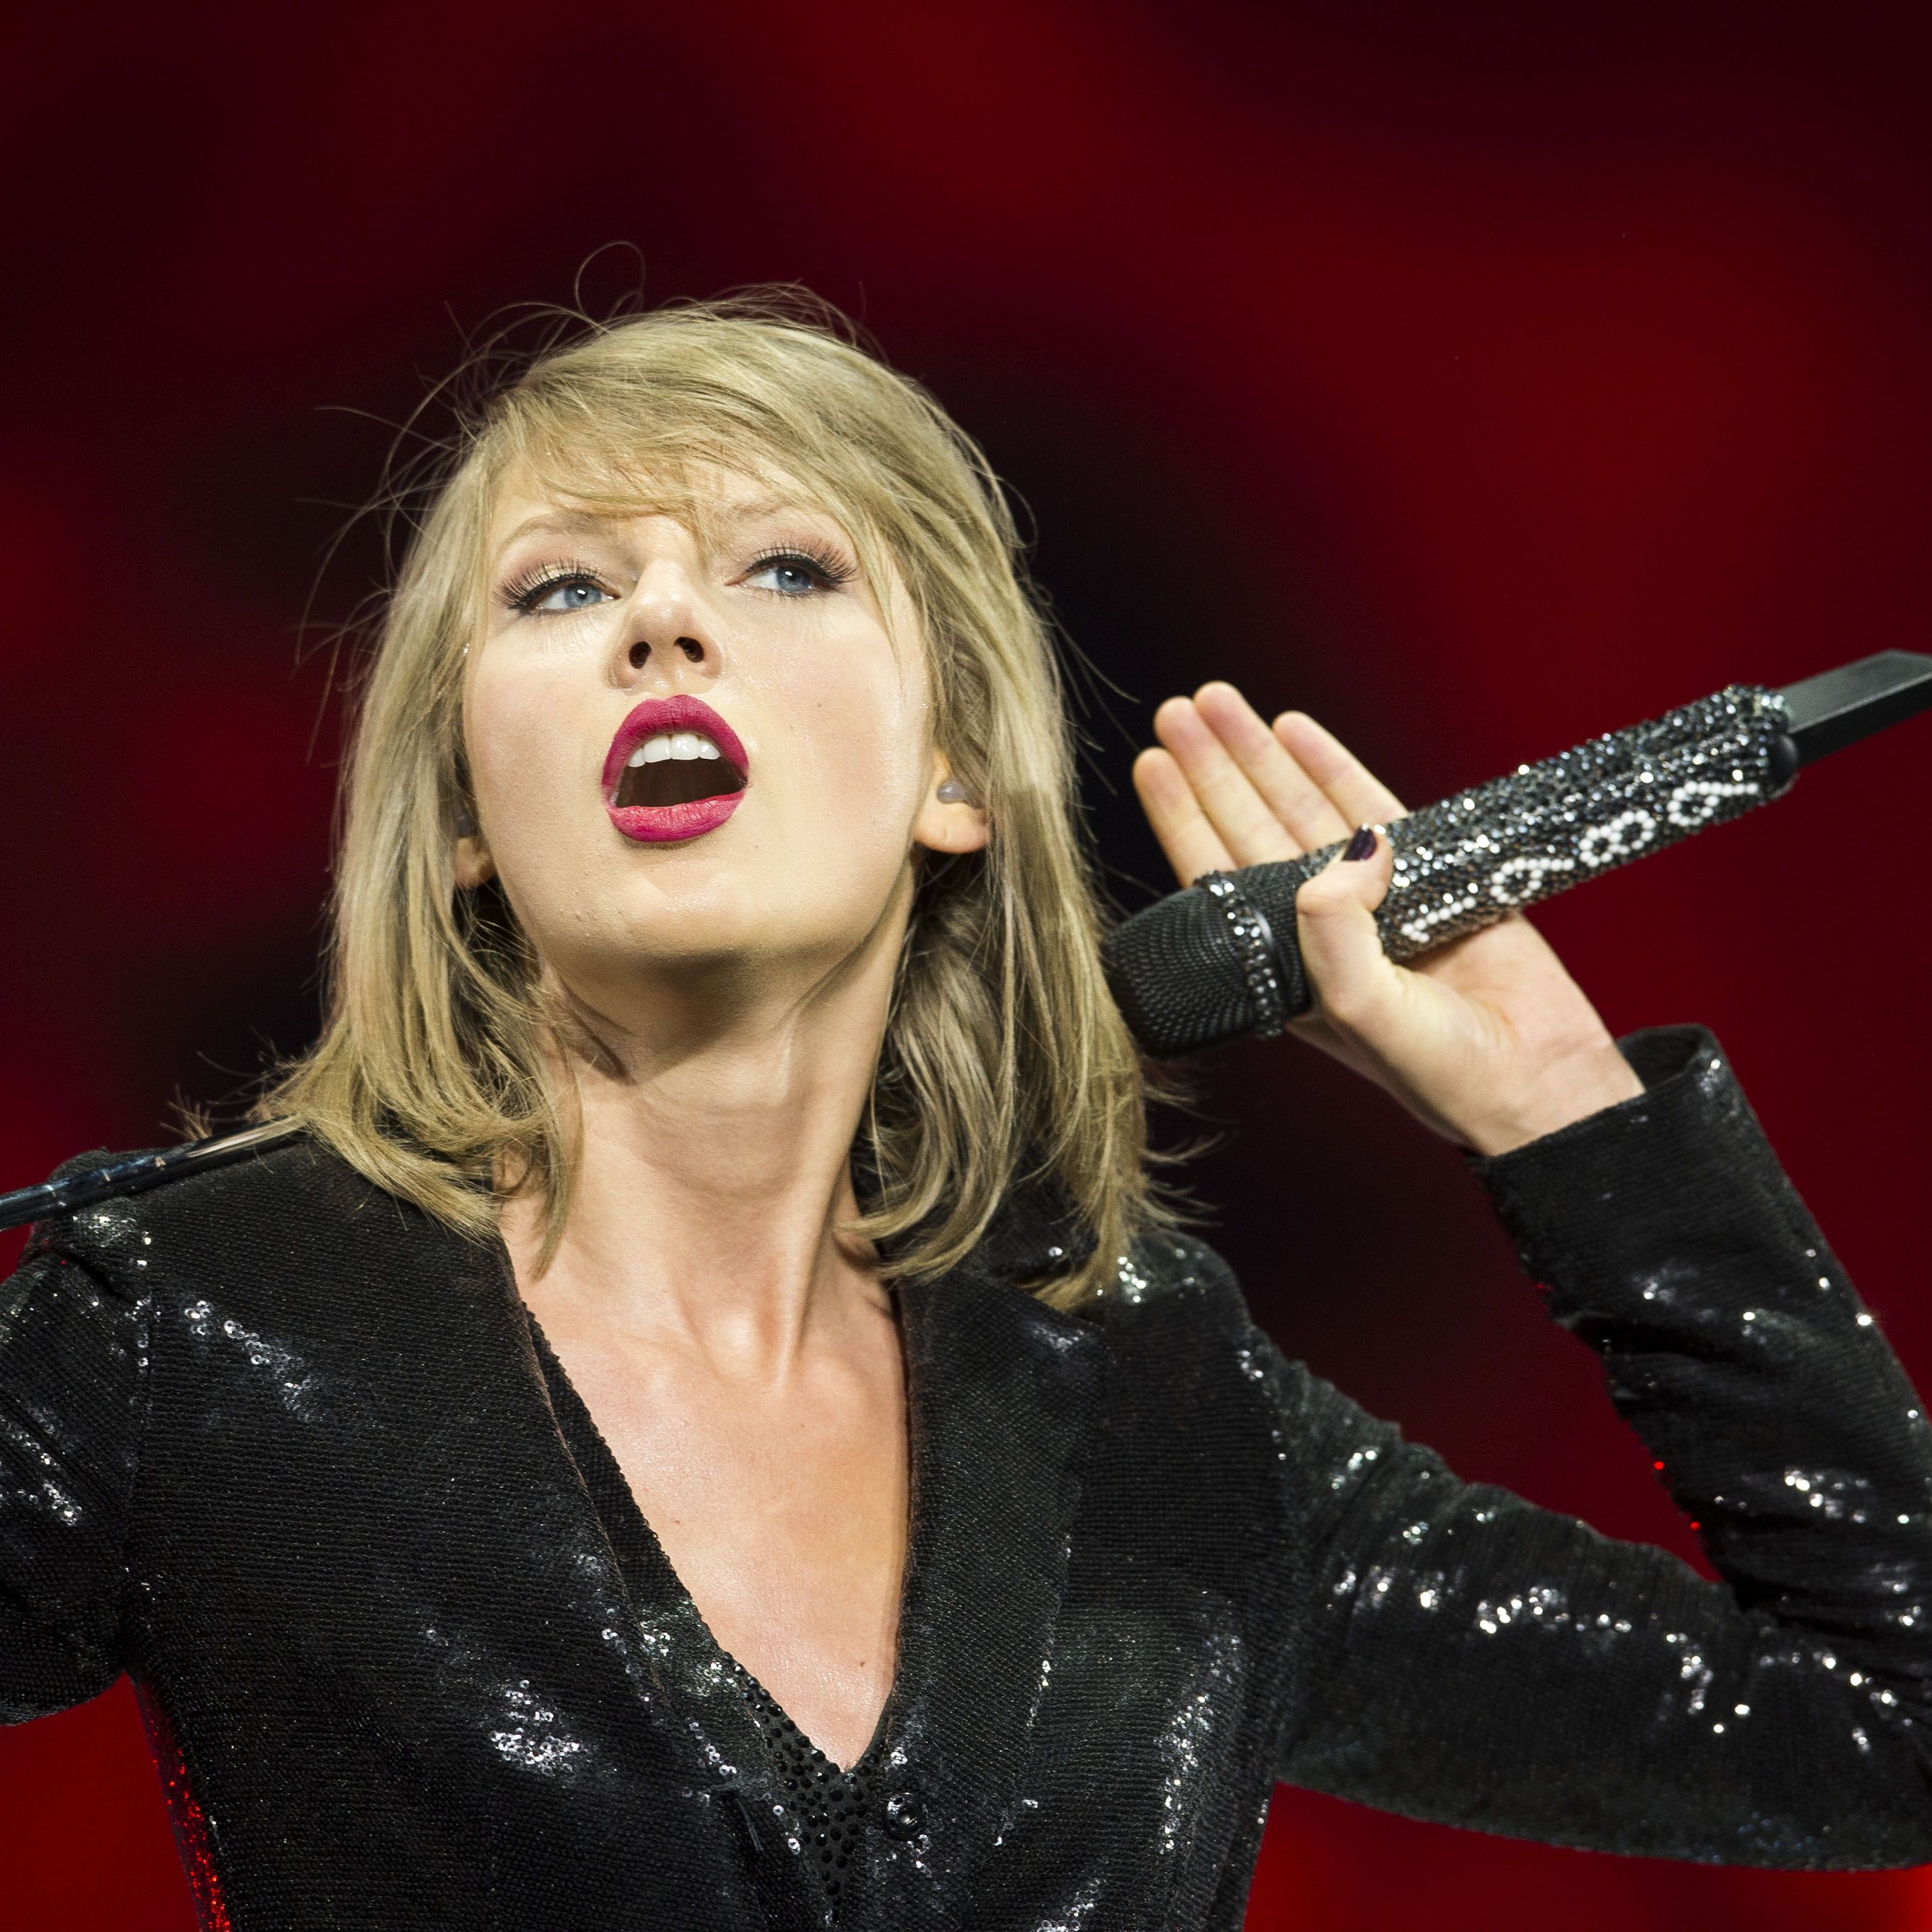 Hark! The Taylor Swift video games sing